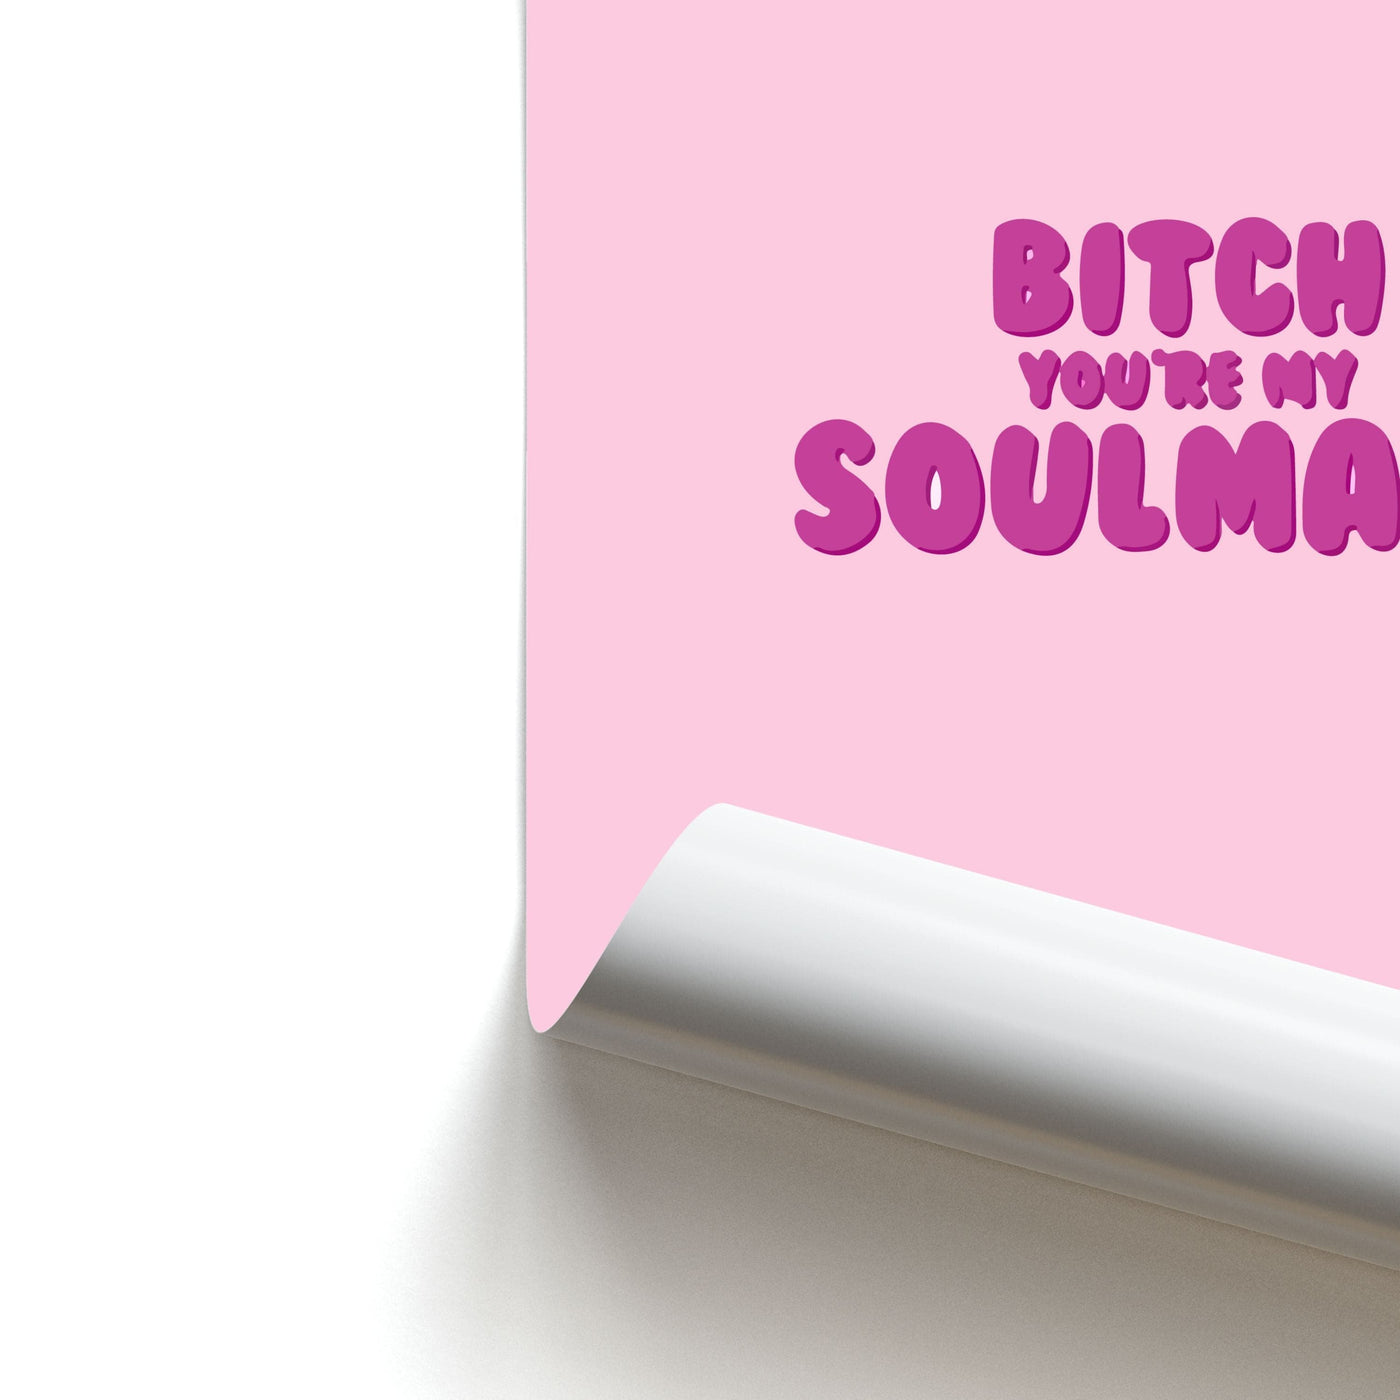 Bitch You're My Soulmate - Euphoria Poster